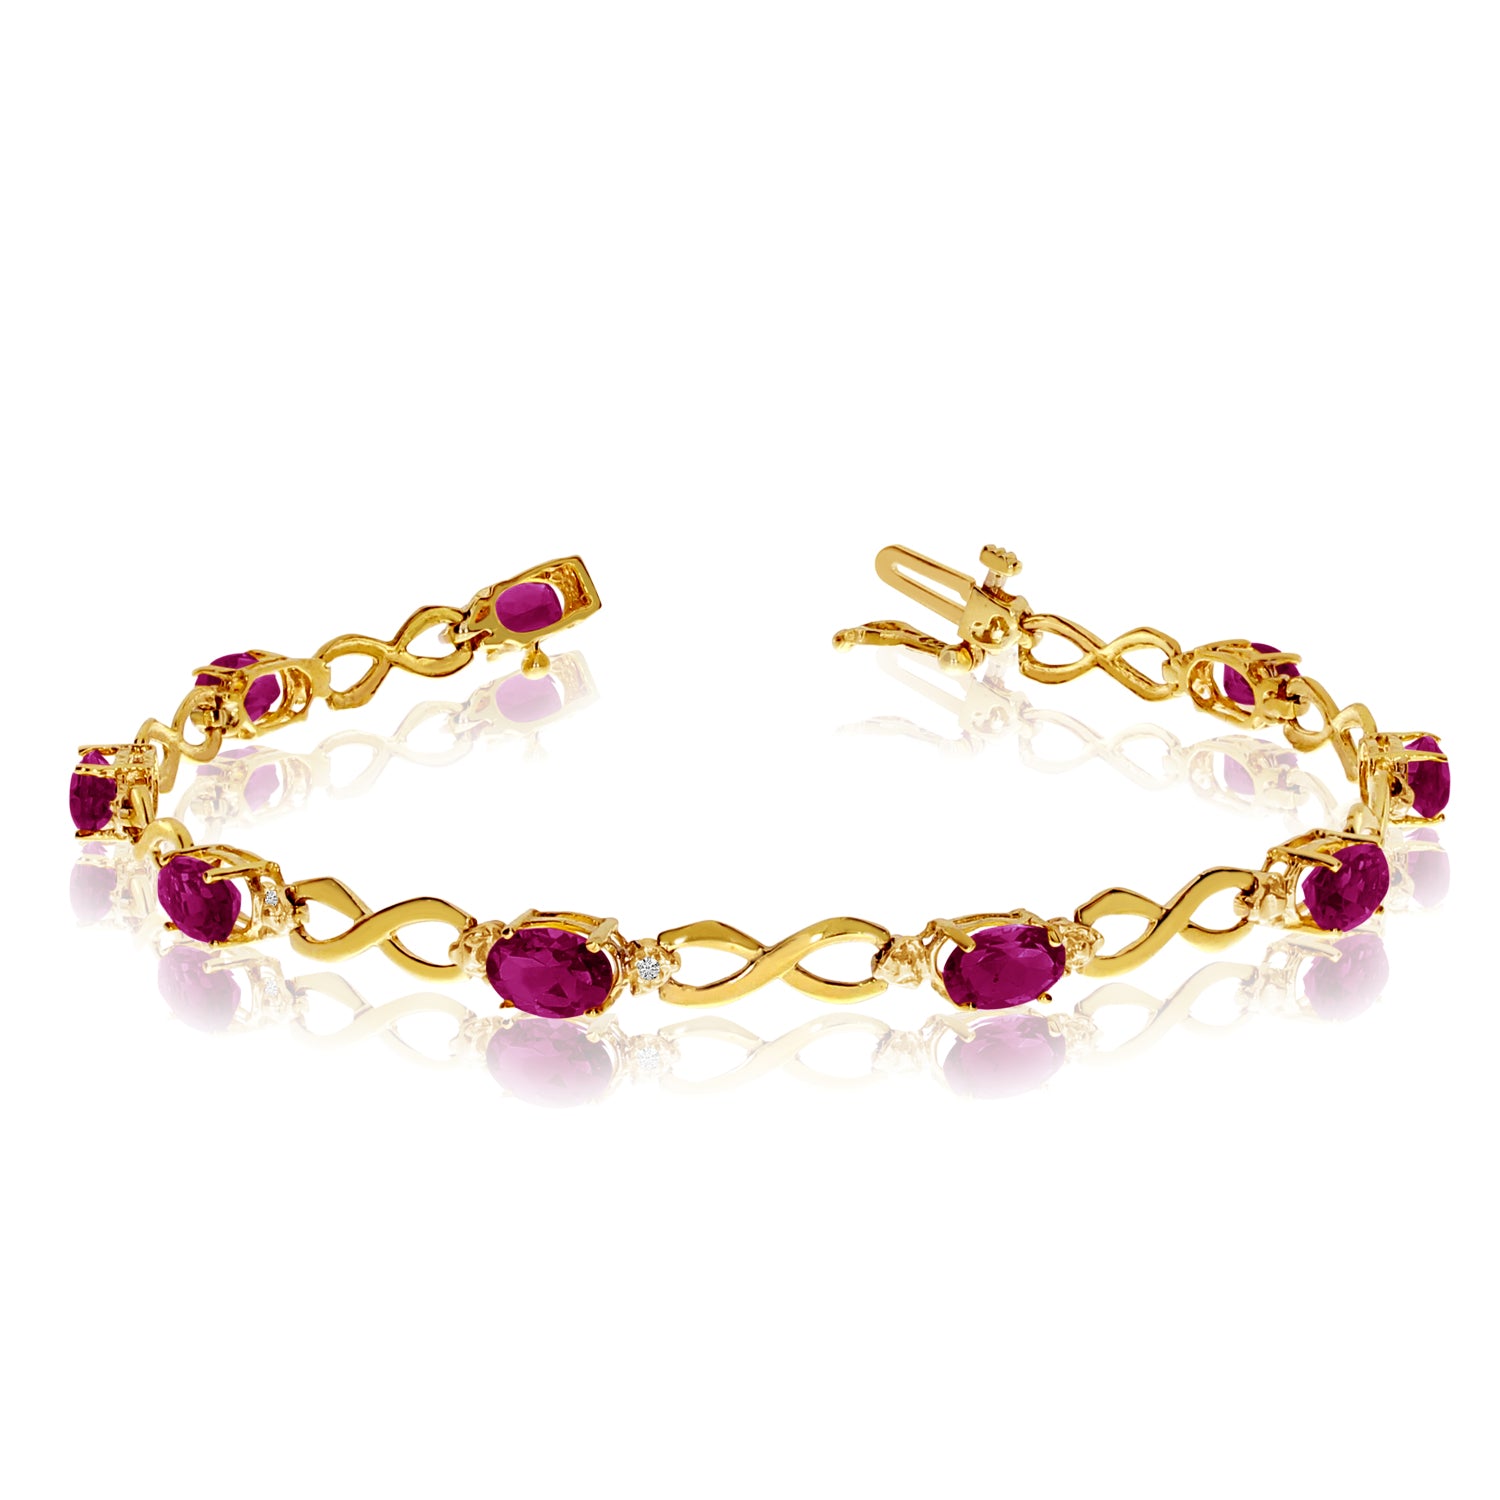 10K Yellow Gold Oval Ruby Stones And Diamonds Infinity Tennis Bracelet, 7" fine designer jewelry for men and women